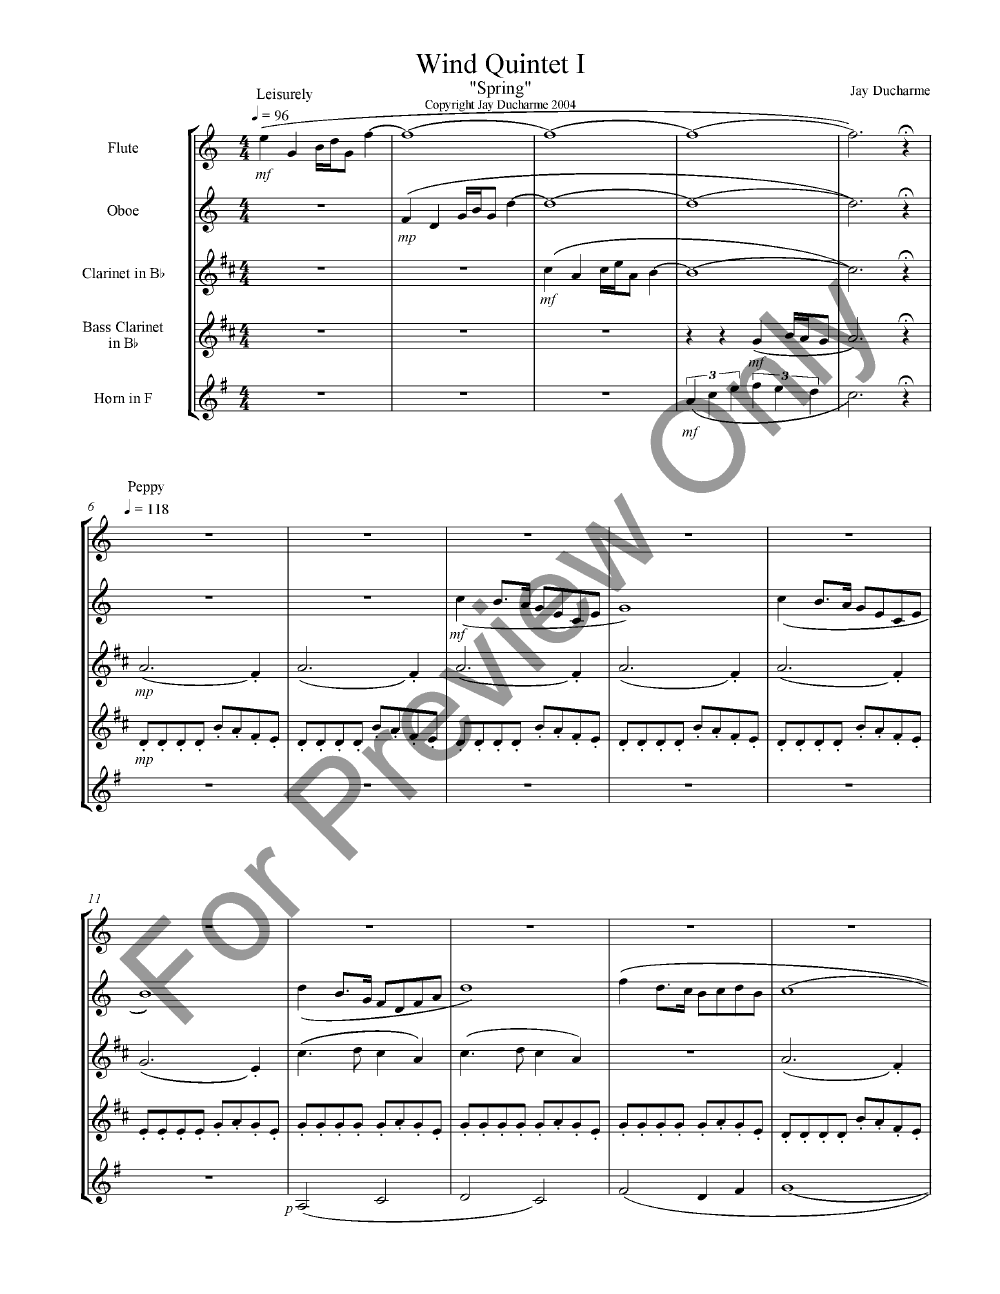 Spring from Wind Quintet I, Movement 1 P.O.D.